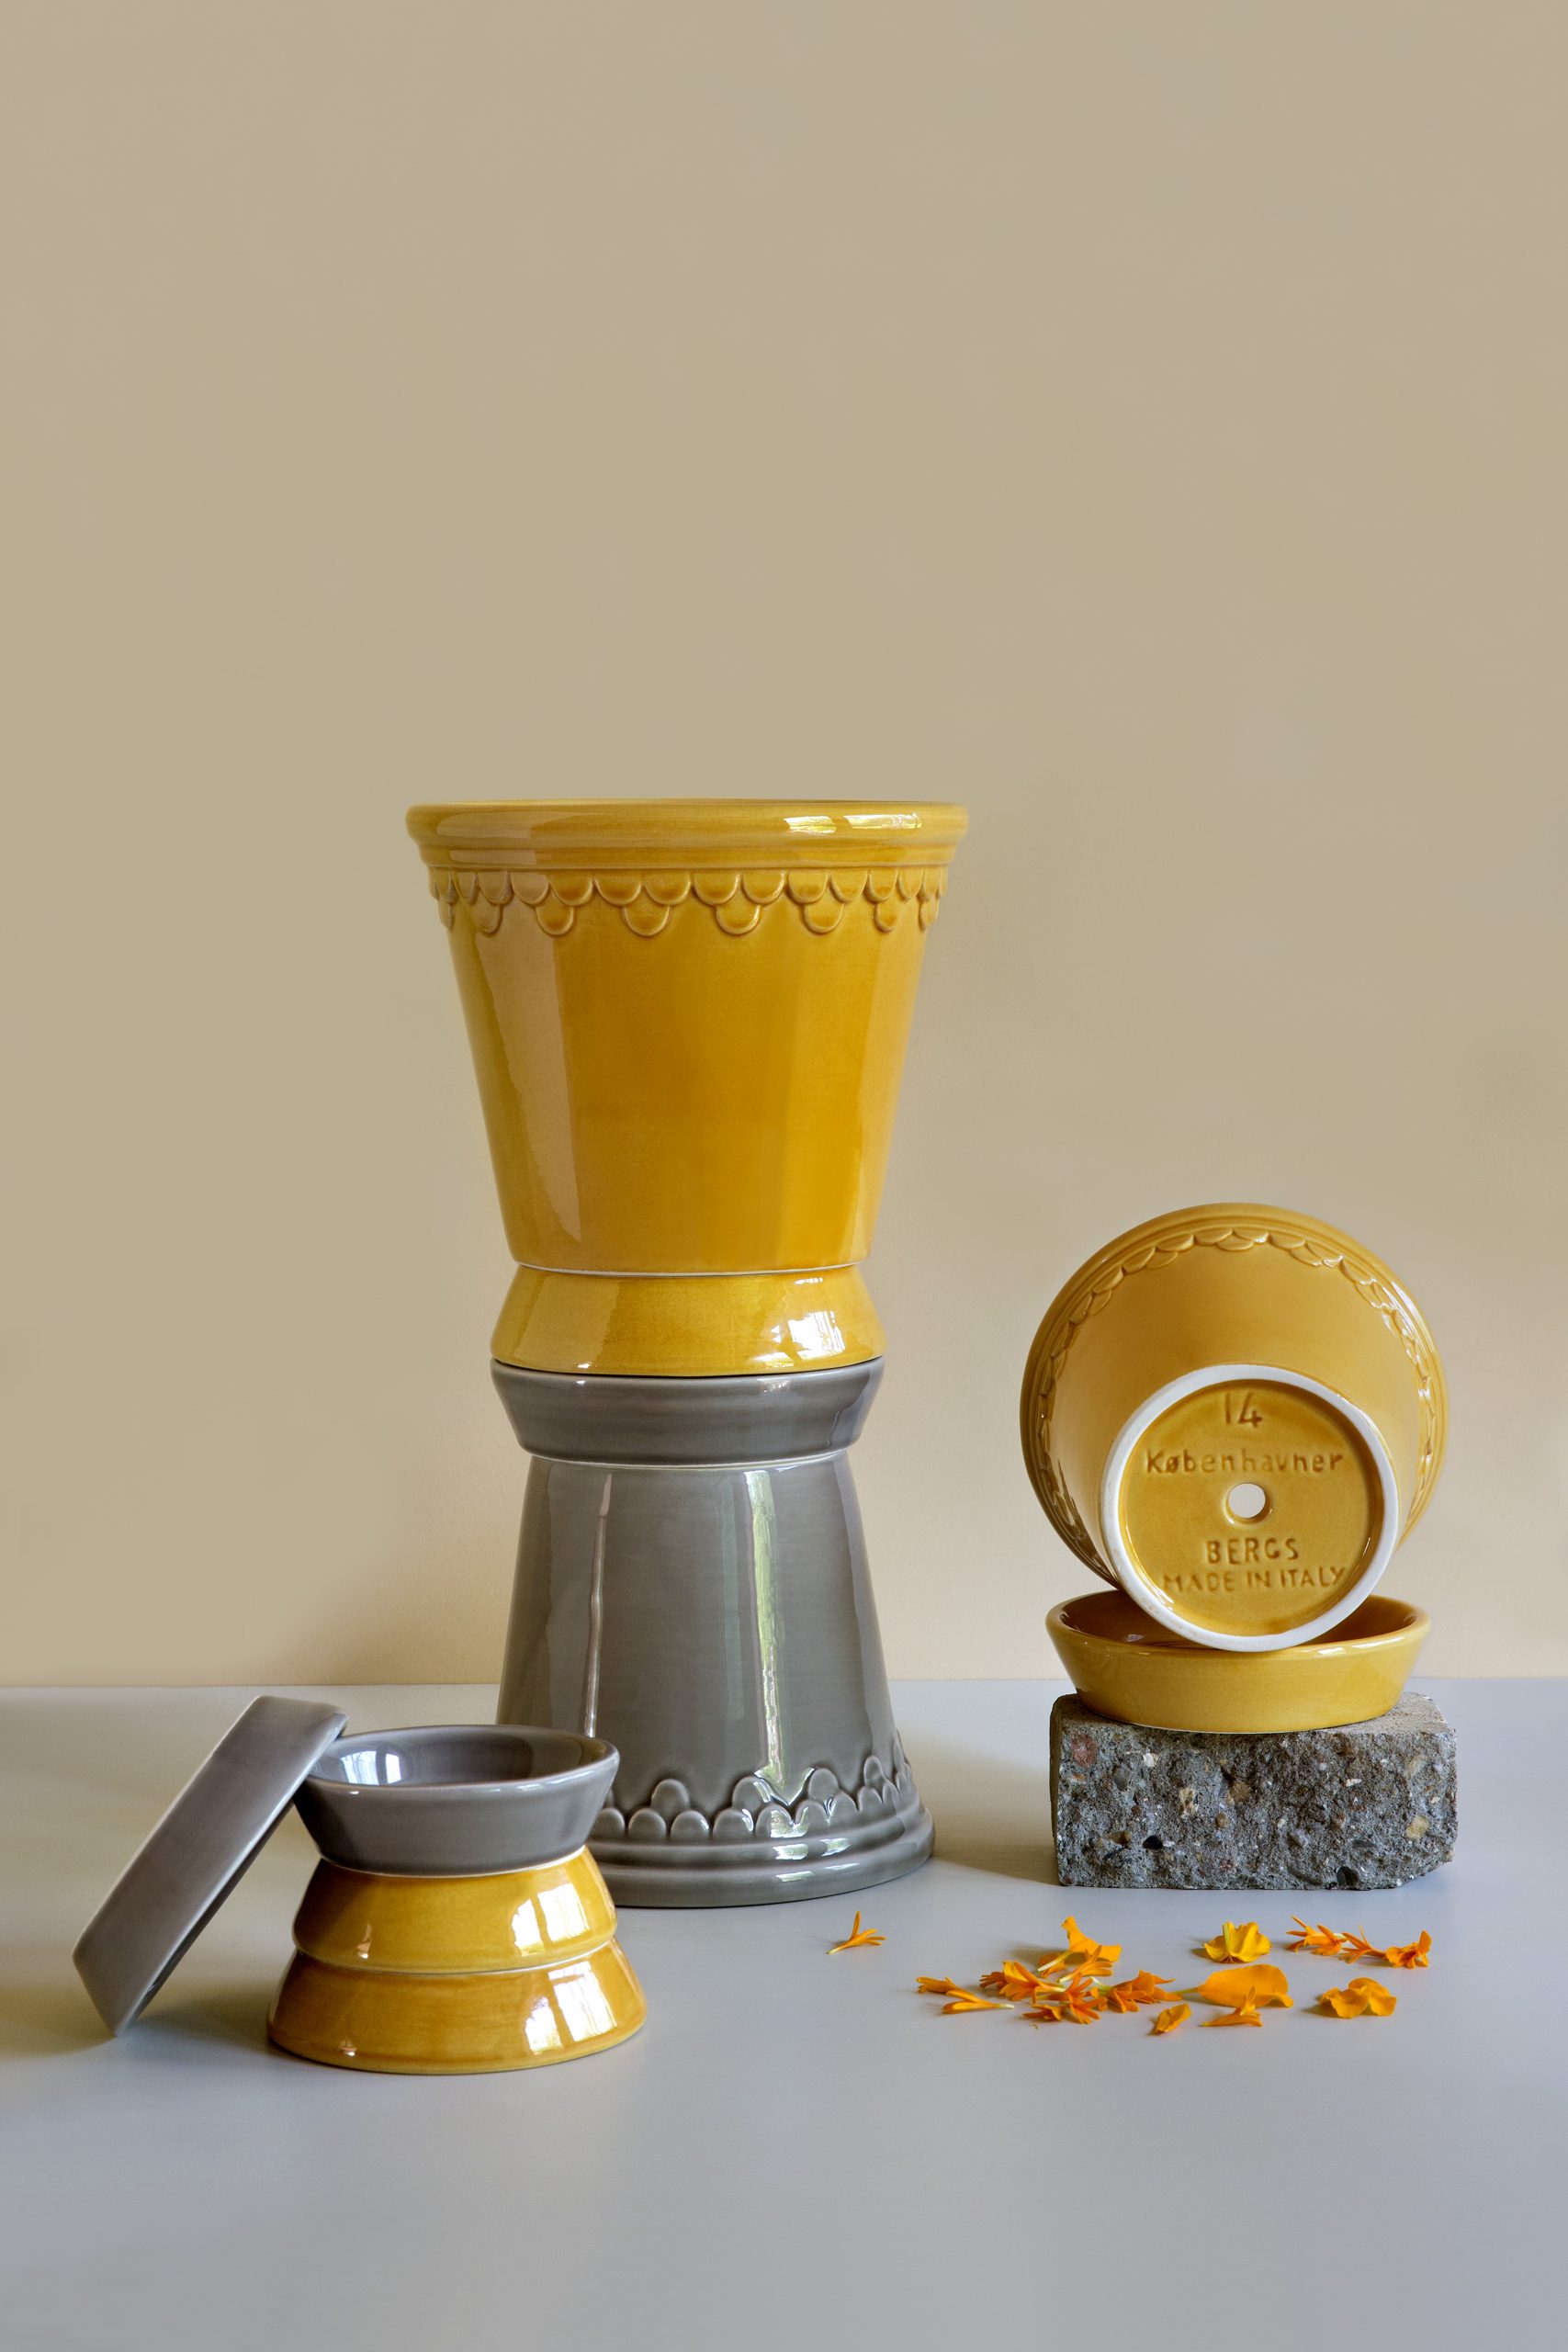 This classic and noble plant pot – Københavner – is inspired by pottery made at the Royal Danish Palace of Fredensborg in 1860.Amber yellow and pearl grey glazed pots and saucers.